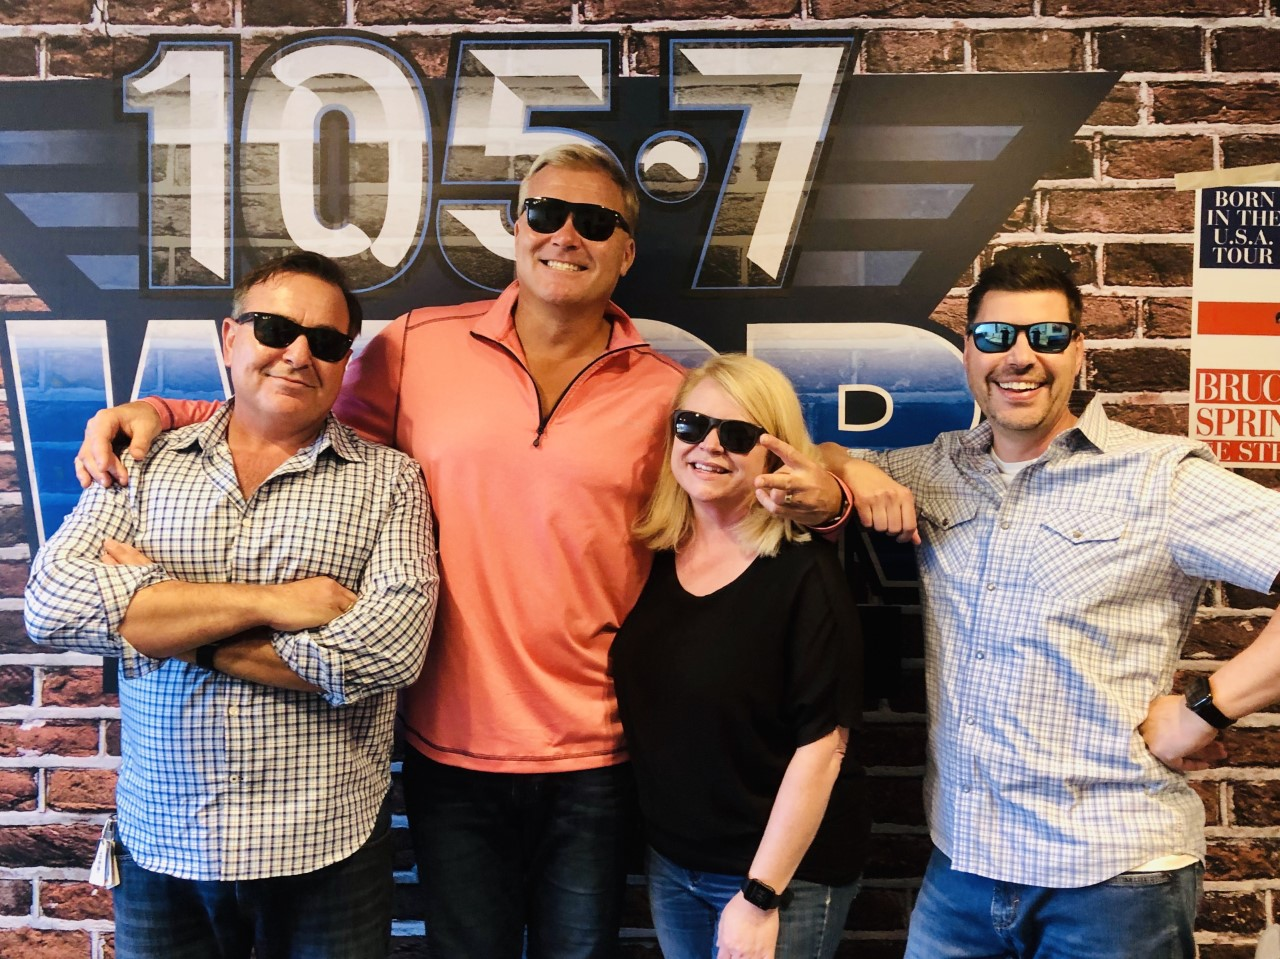 Football Friday with Scott Zolak! 9/23 8:35 am - The ROR Morning Show Podcast